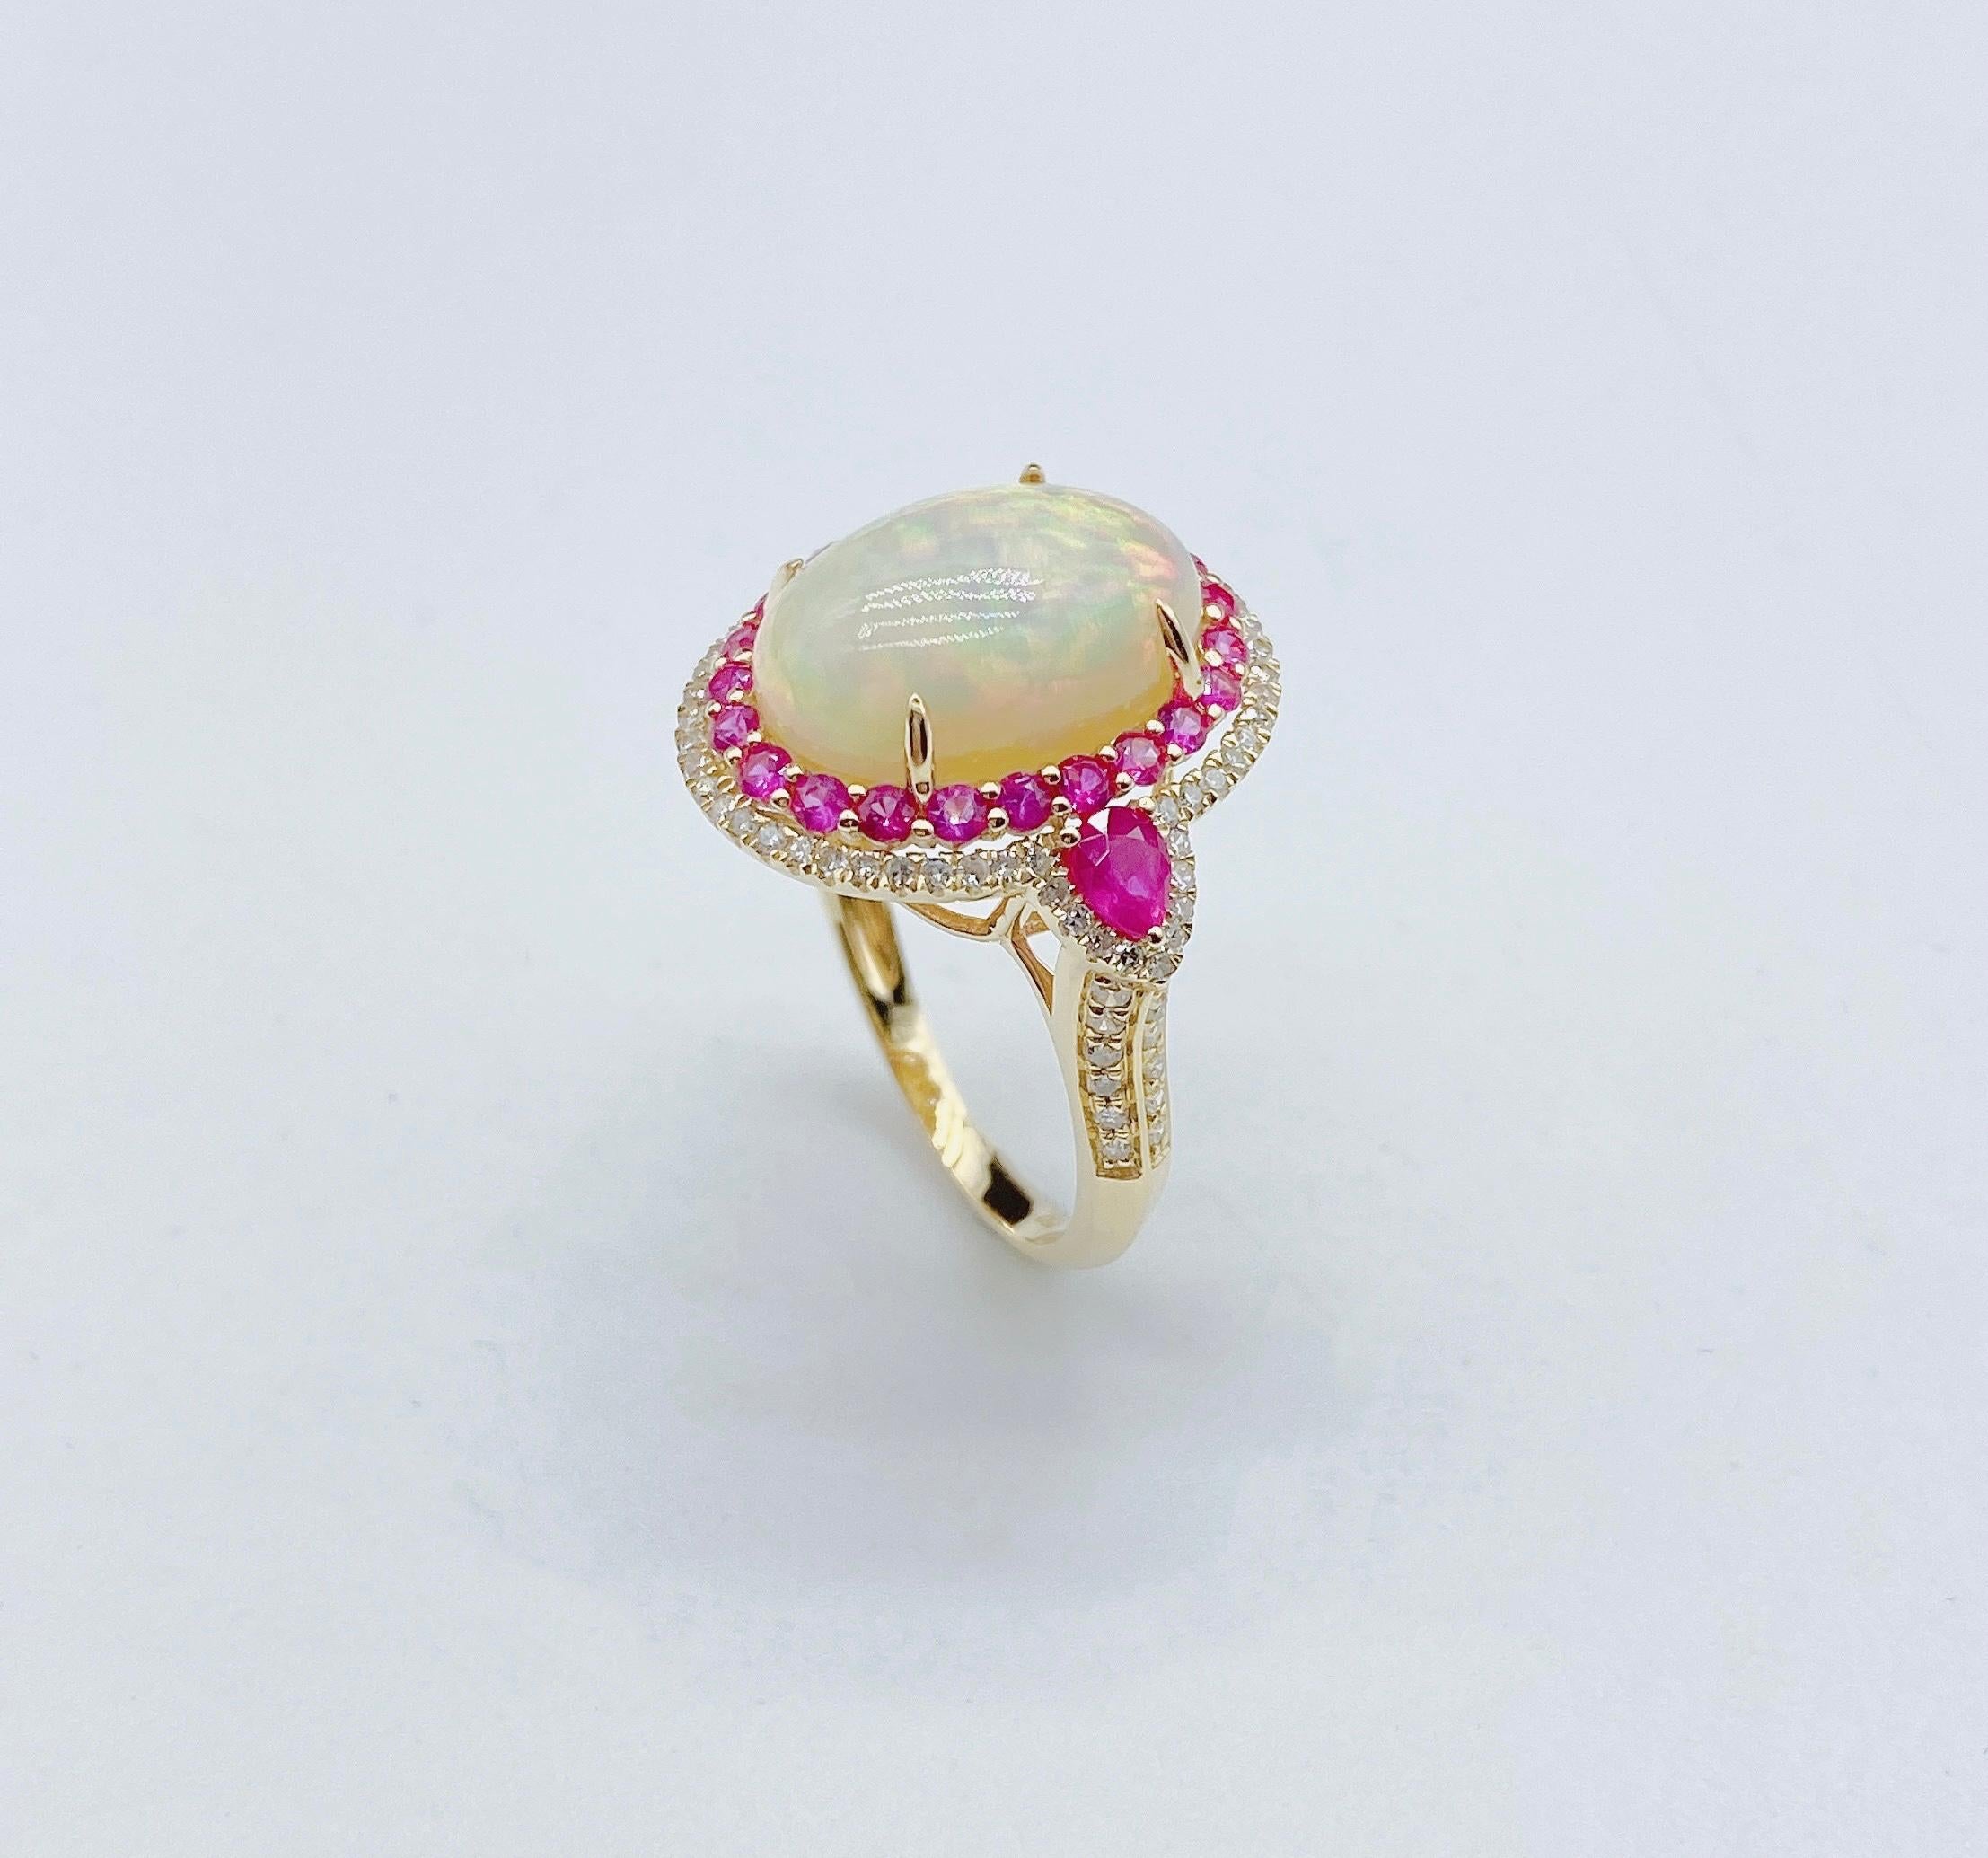 Mixed Cut Nwt 9, 059 Rare 18KT Fancy Large Gorgeous Glittering 6CT Opal Ruby Diamond Ring For Sale